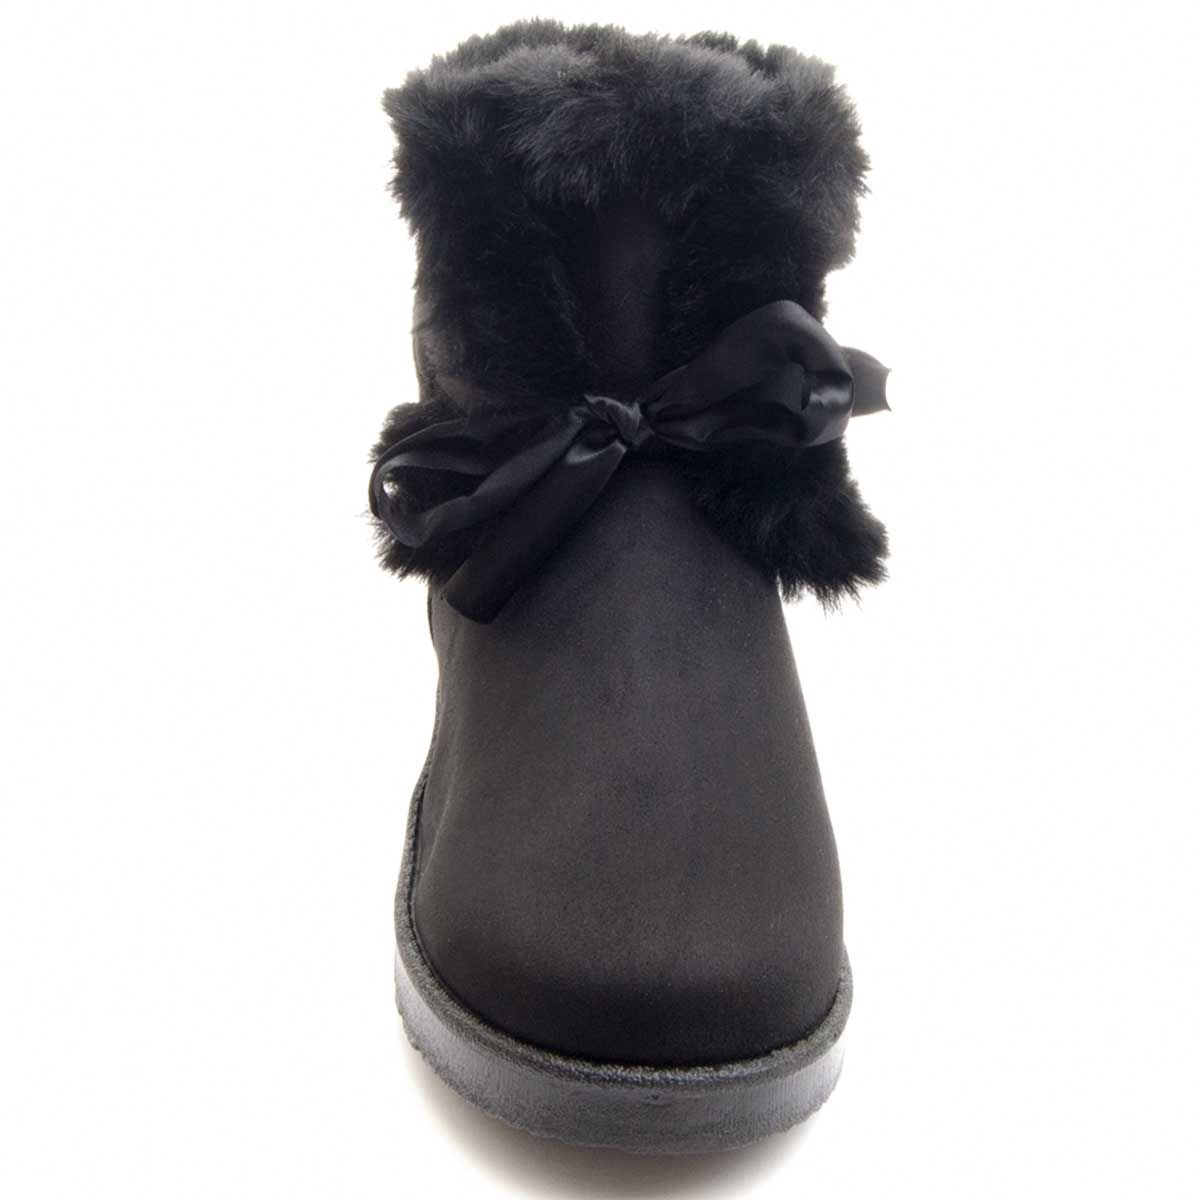 Ideal boot with perfect hair for winter as it is totally lined. Very warm and comfortable. The material is soft and easy to clean. The term is perfectly adapted to the foot and is wide. The floor is light but non-slip and quality. It has an earlier and subsequent buttress to achieve greater durability. This is not an either boot. Manufactured in collaboration with Kylie.